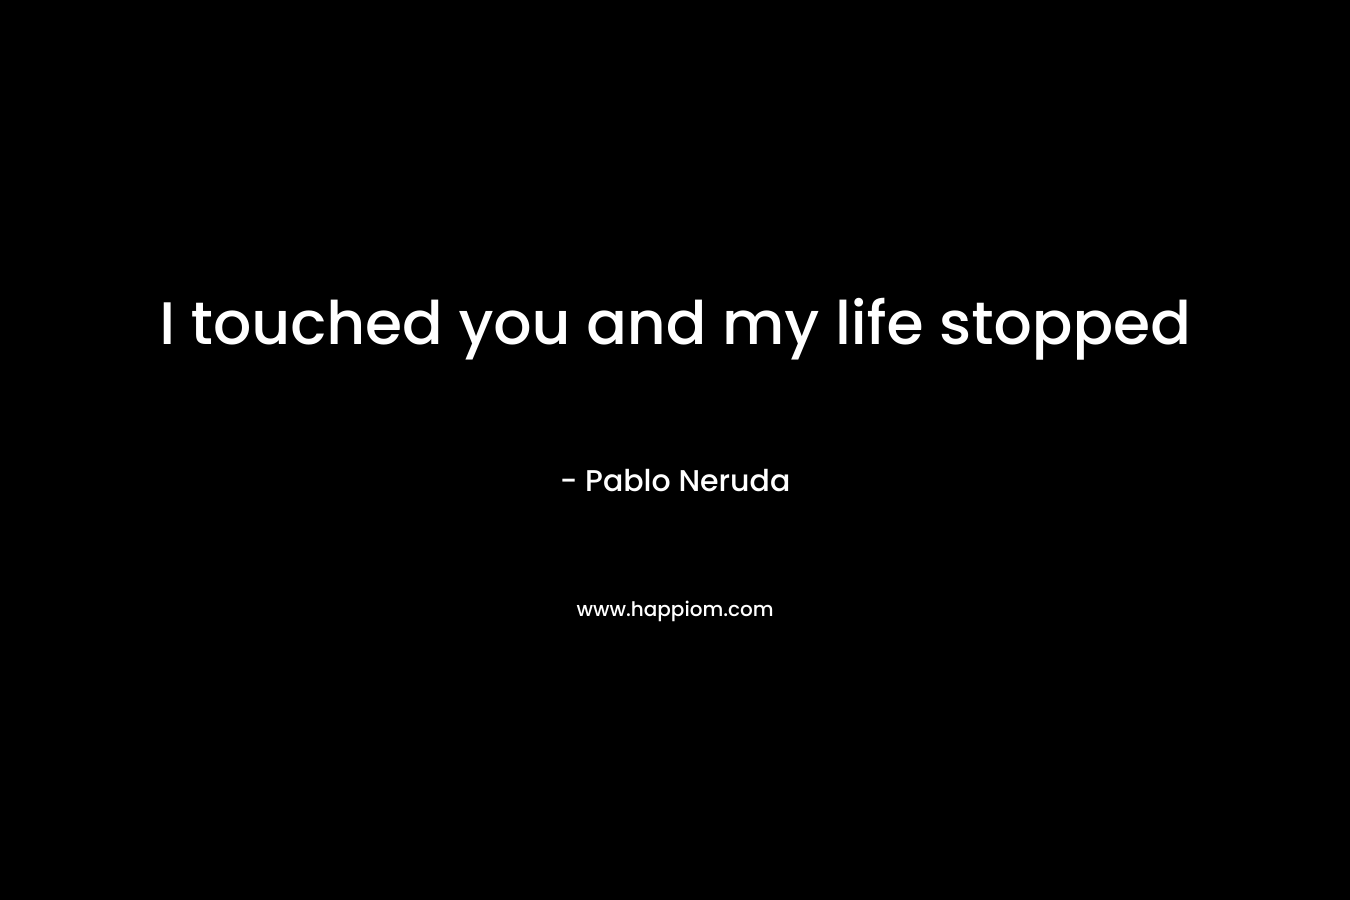 I touched you and my life stopped